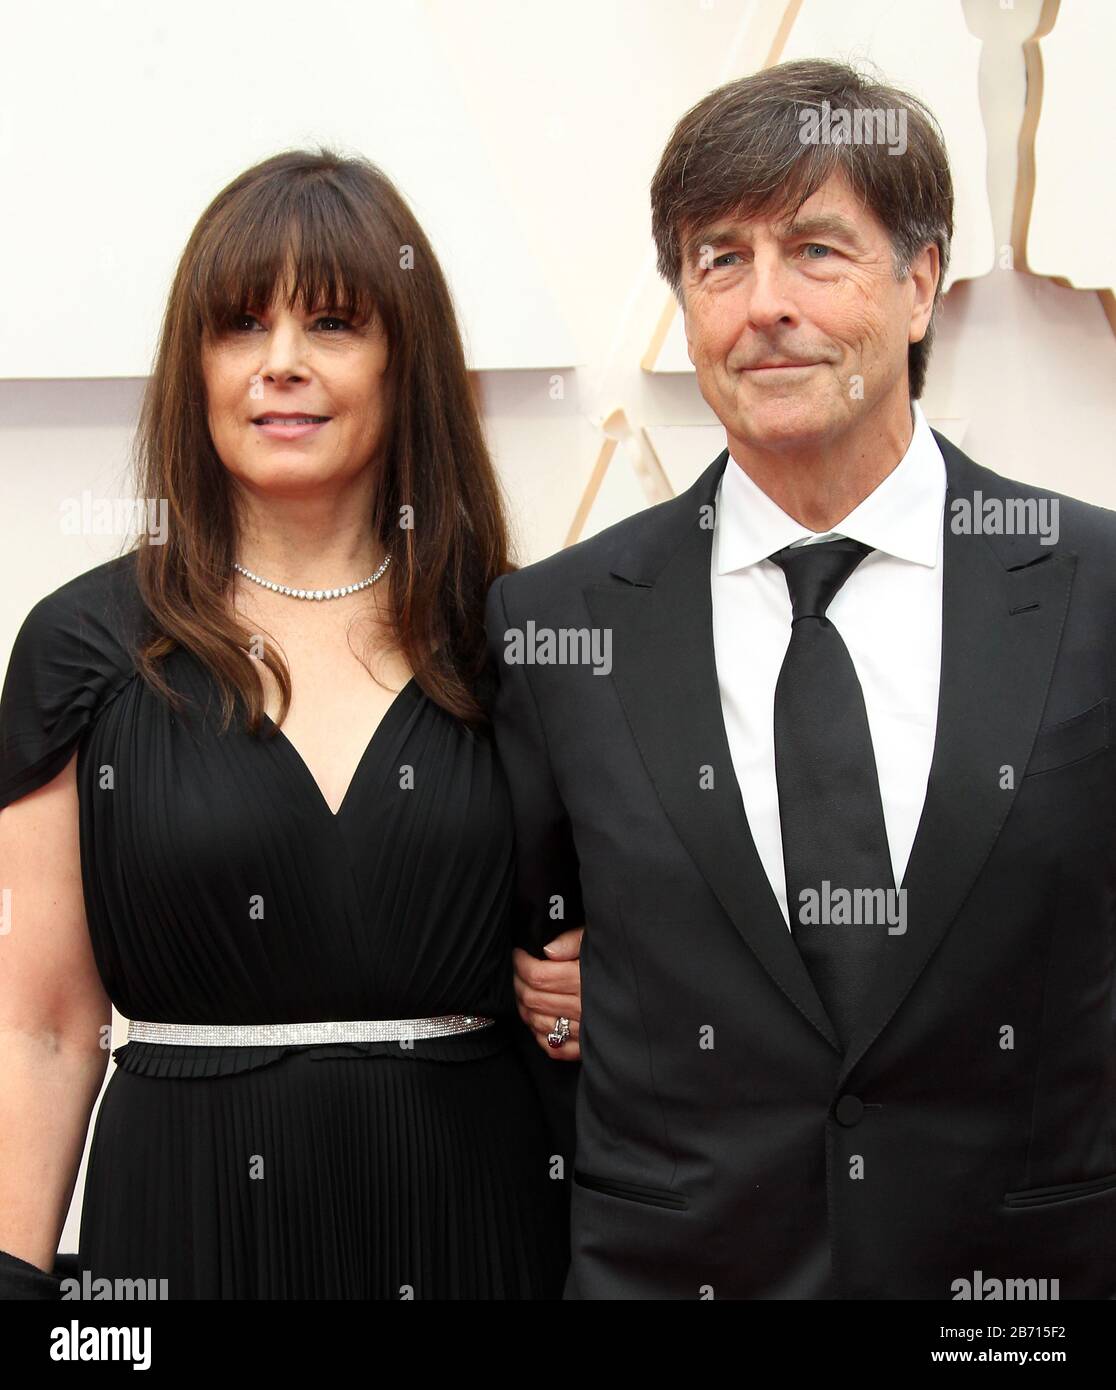 92nd Academy Awards (Oscars 2020) - Arrivals held at the Dolby Theatre in Los Angeles, California. Featuring: Ann Marie Zirbes, Thomas Newman Where: Los Angeles, California, United States When: 09 Feb 2020 Credit: Adriana M. Barraza/WENN Stock Photo